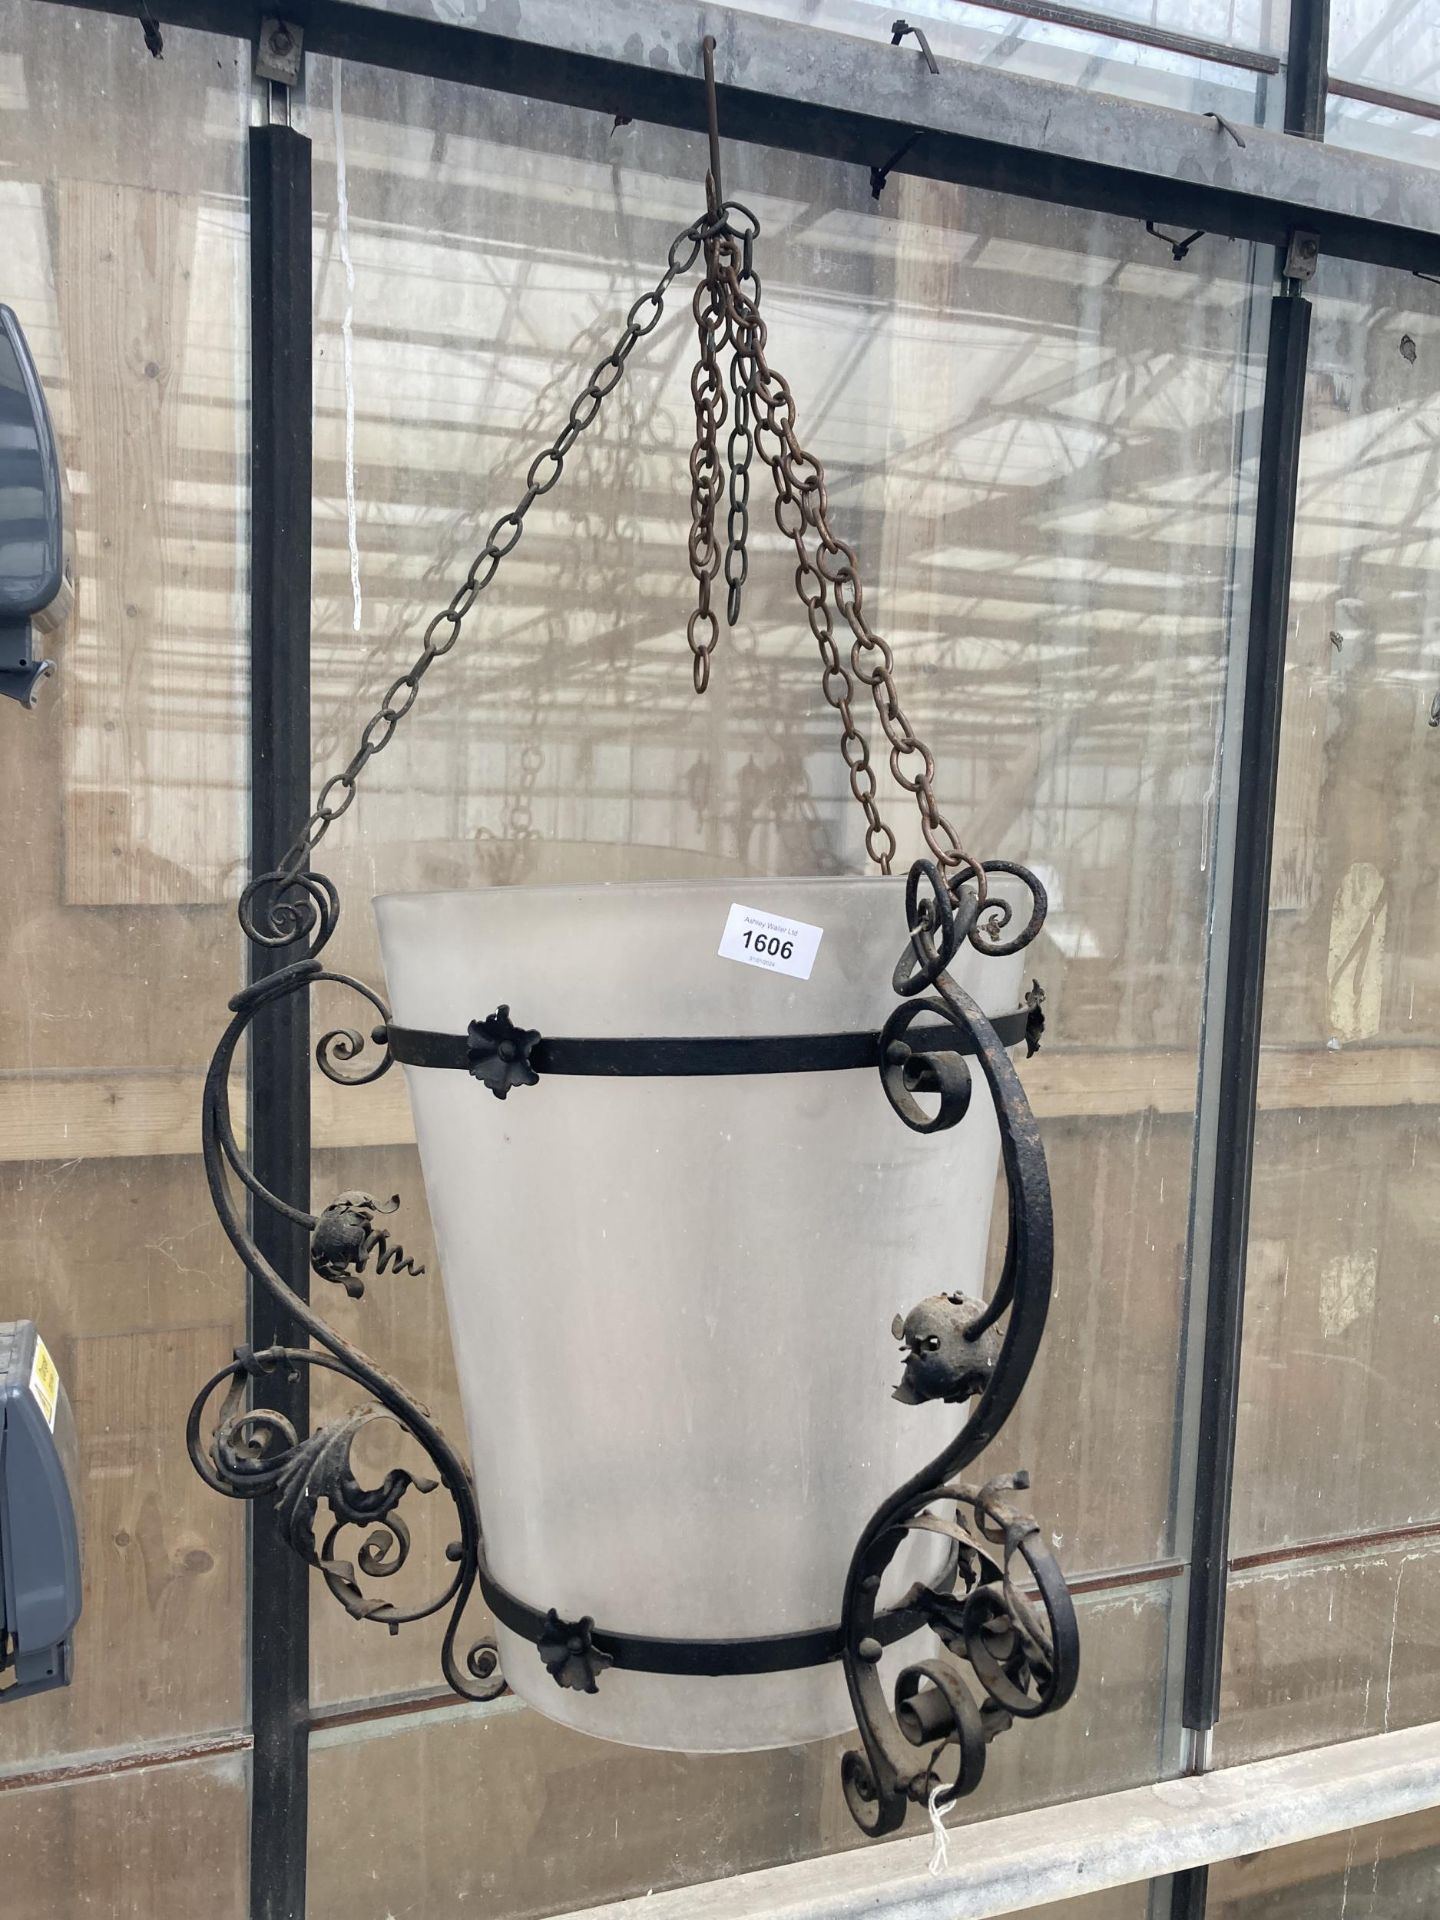 A LARGE VINTAGE FROSTED GLASS LIGHT SHADE WITH METAL DETAIL AND HANGING CHAINS